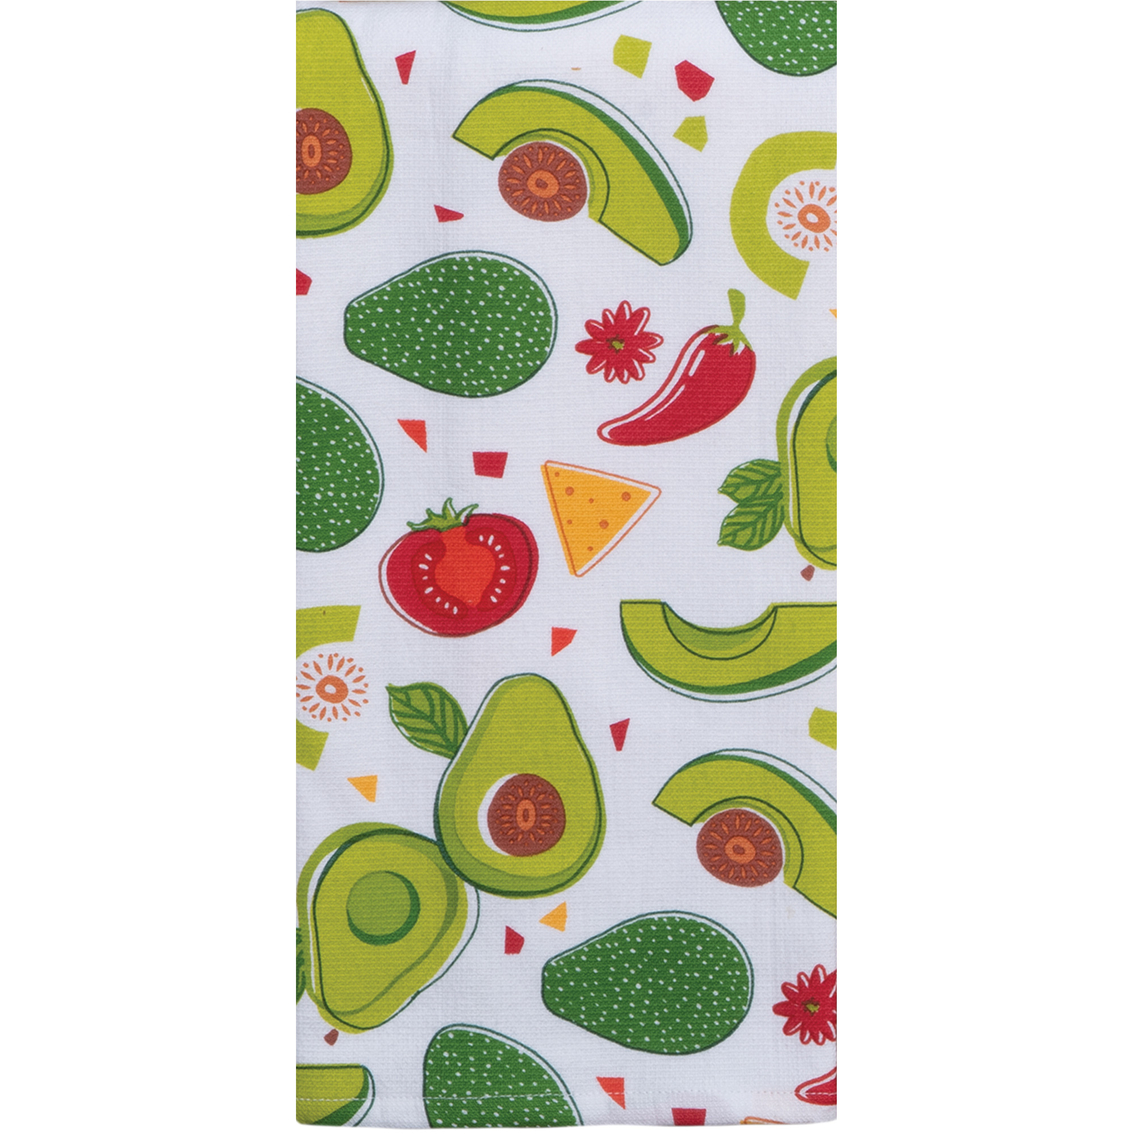 Set of 2 GUAC WORLD Avocado Guacamole Terry Kitchen Towels by Kay Dee Designs